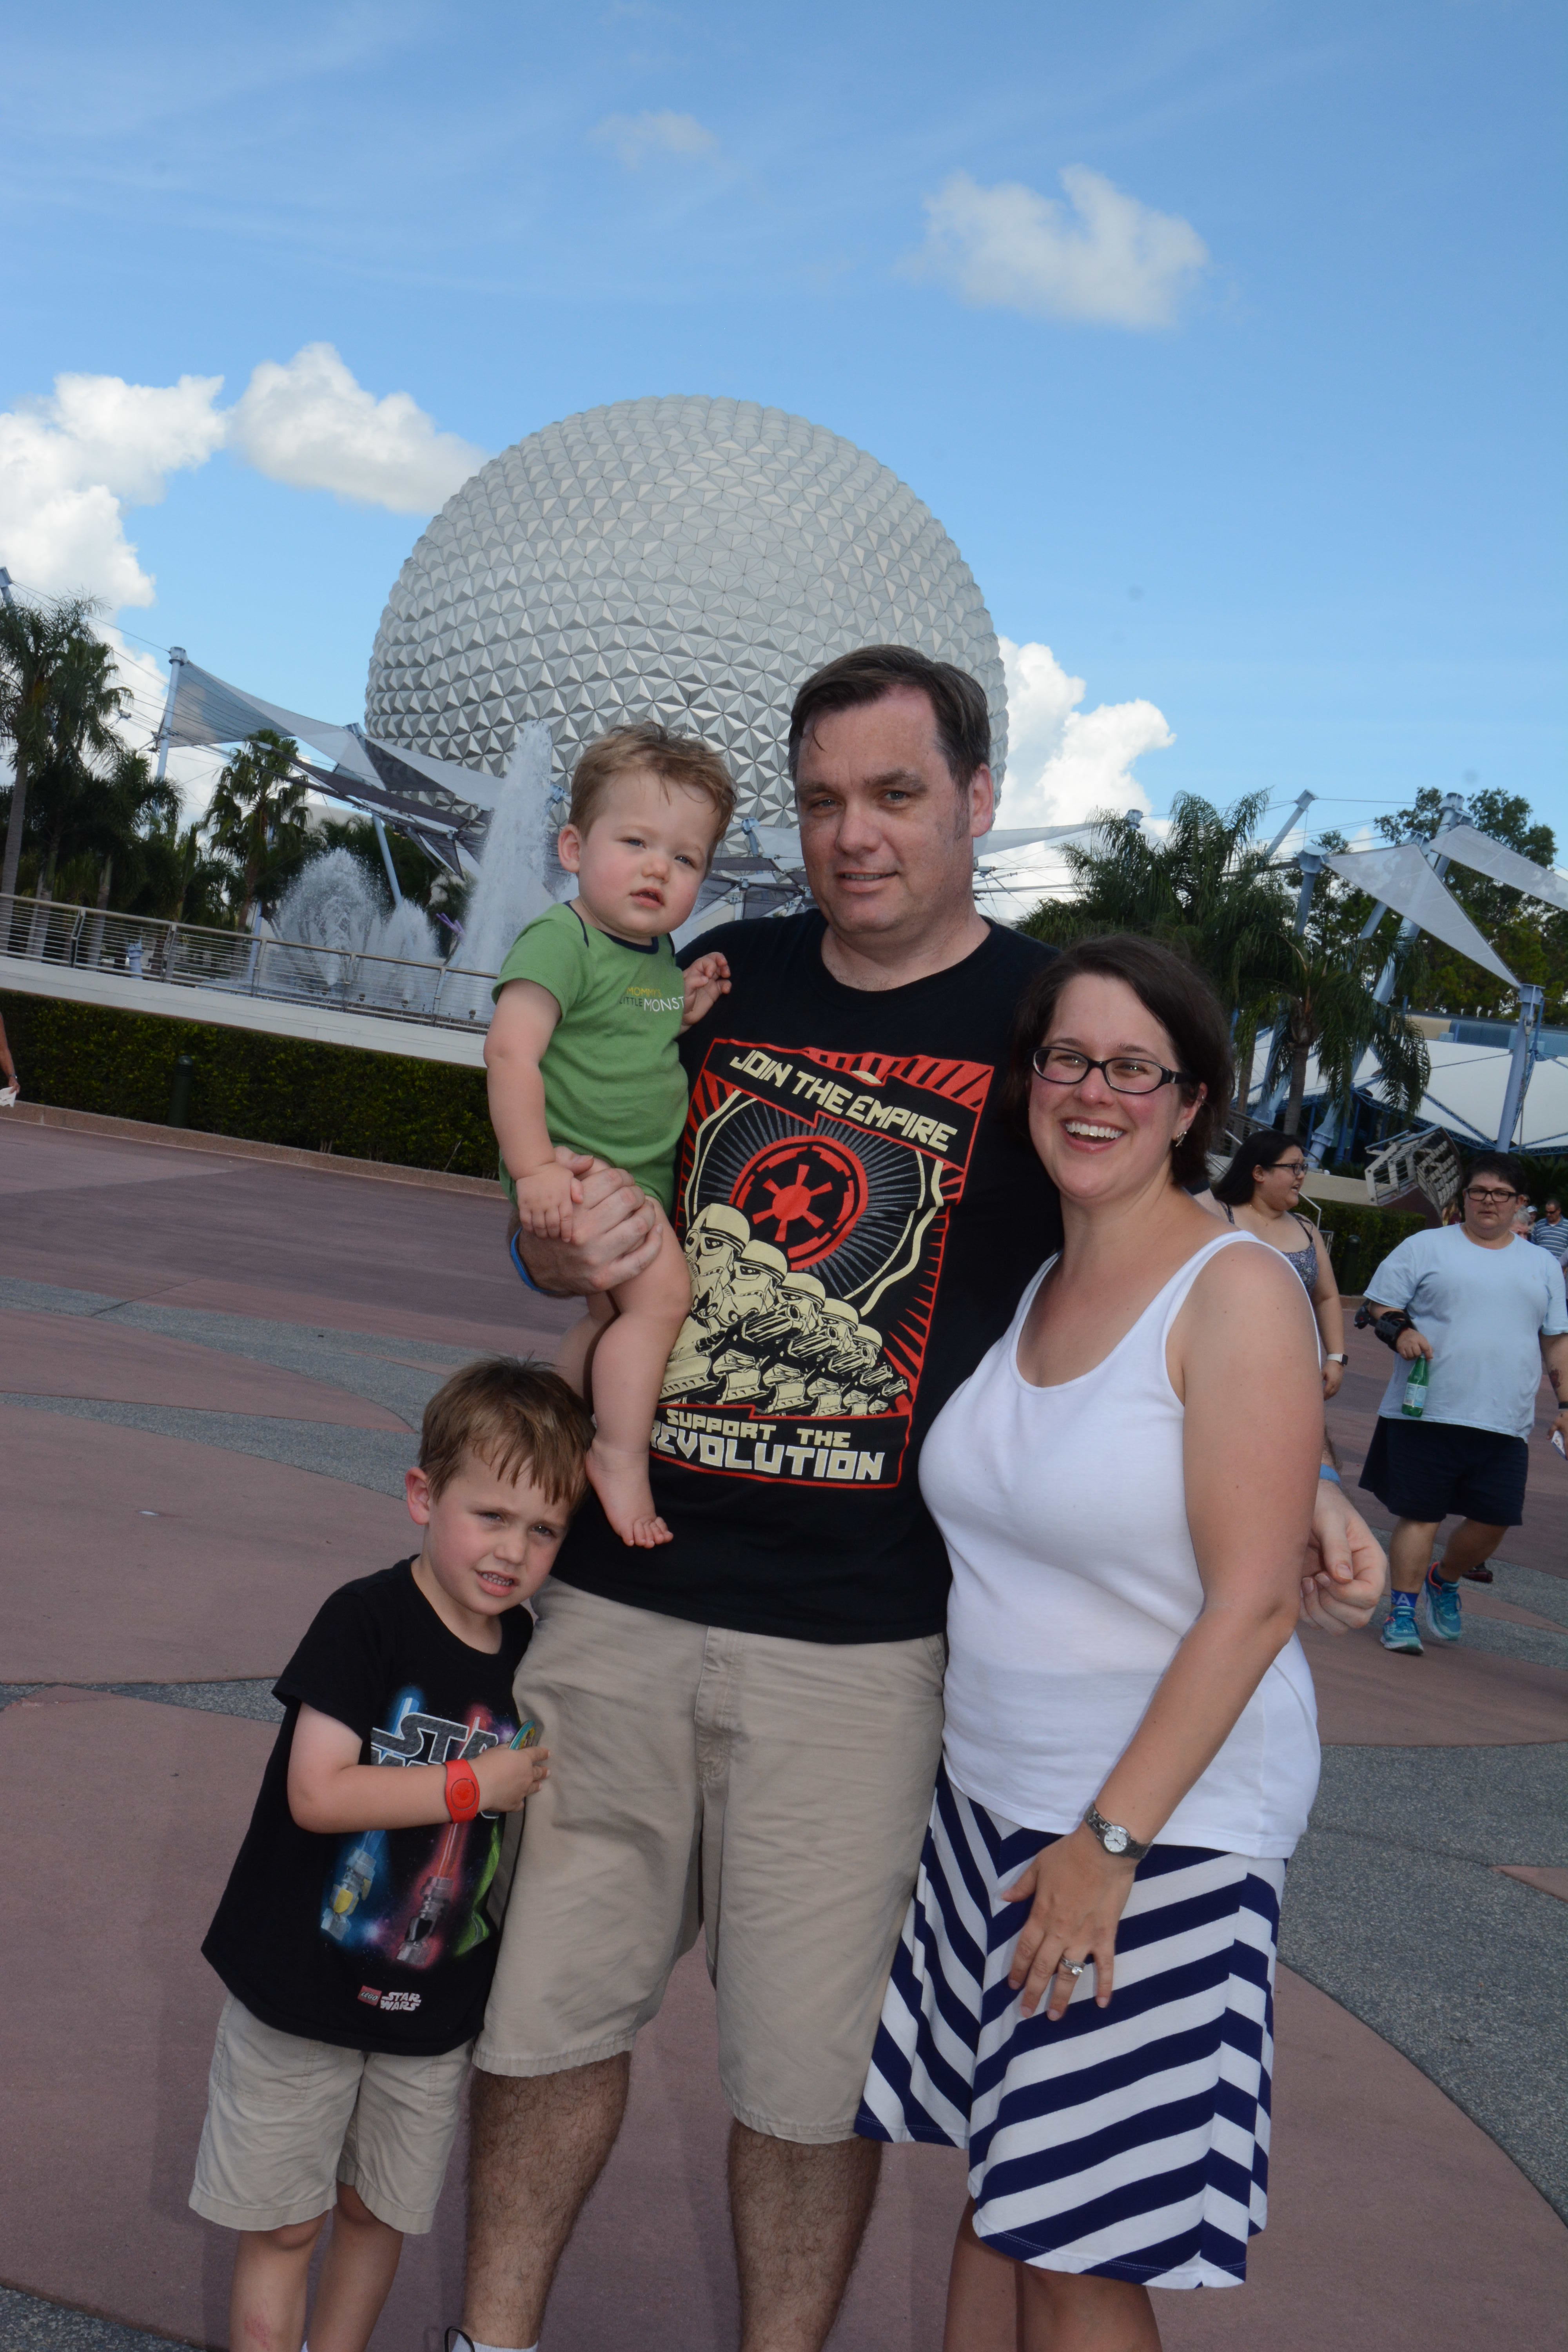 Going Global at Epcot